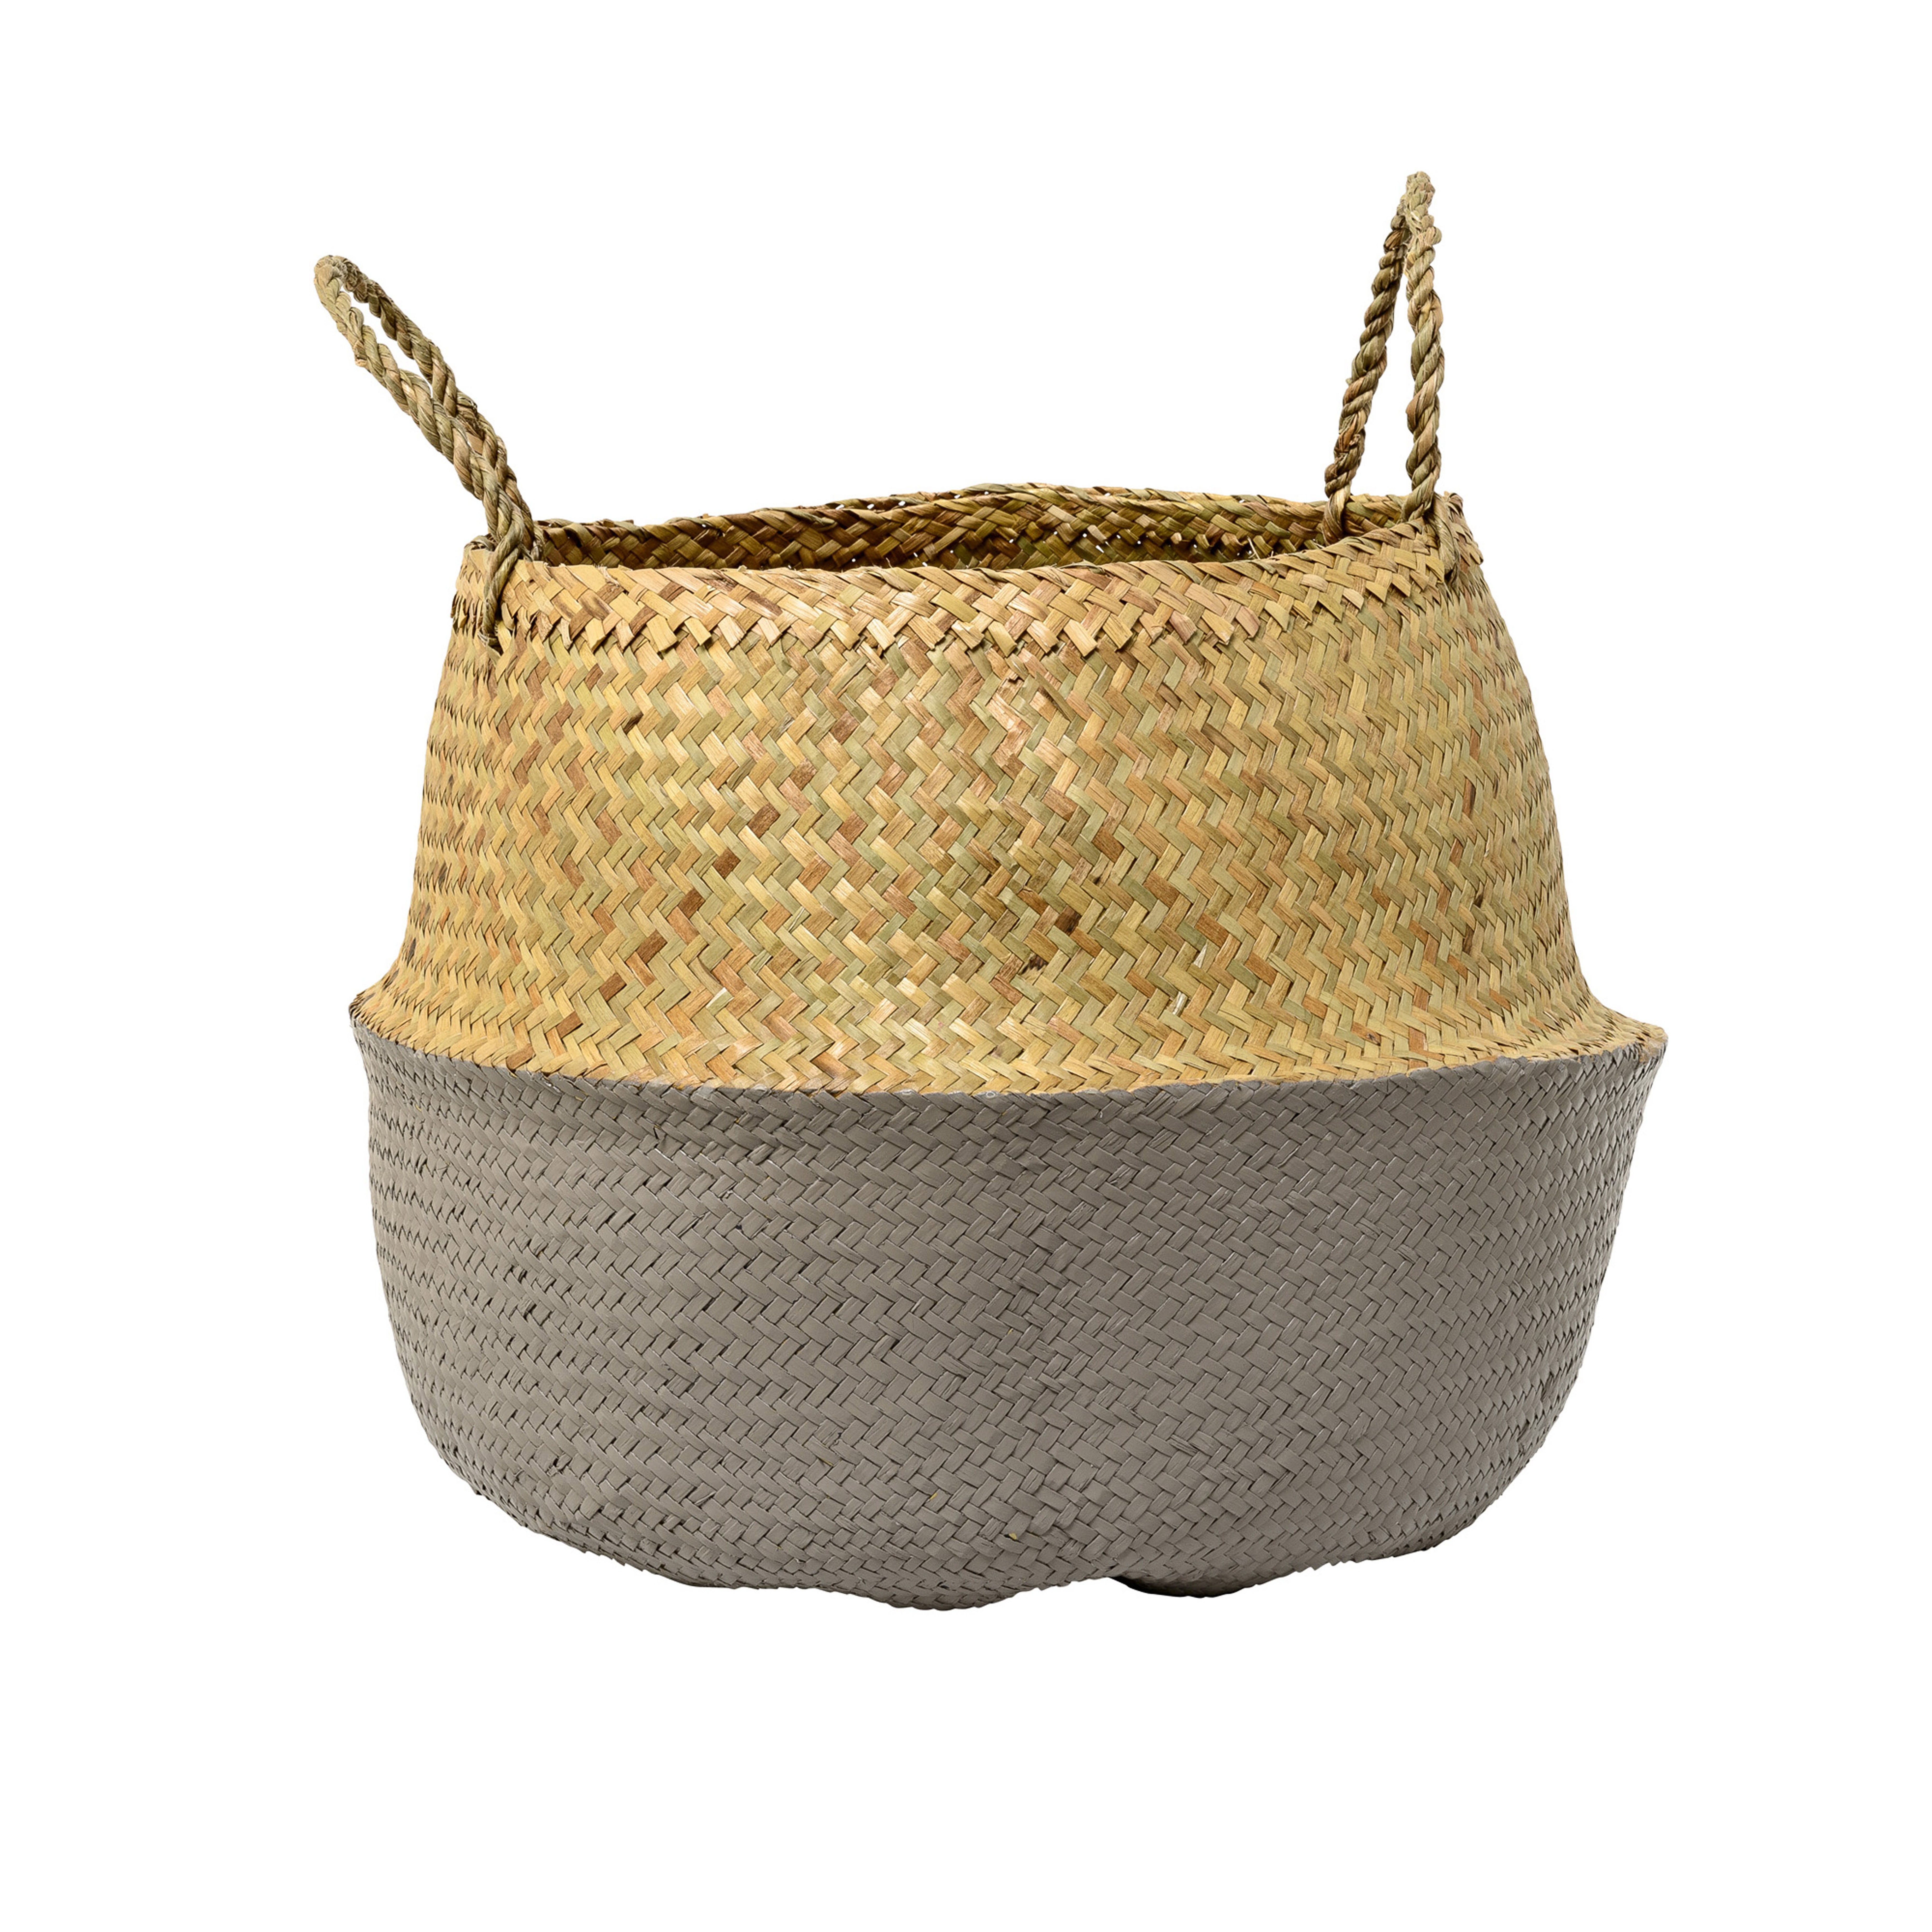 Seagrass Folding Basket with Handles, Gray & Natural - Moss & Wilder